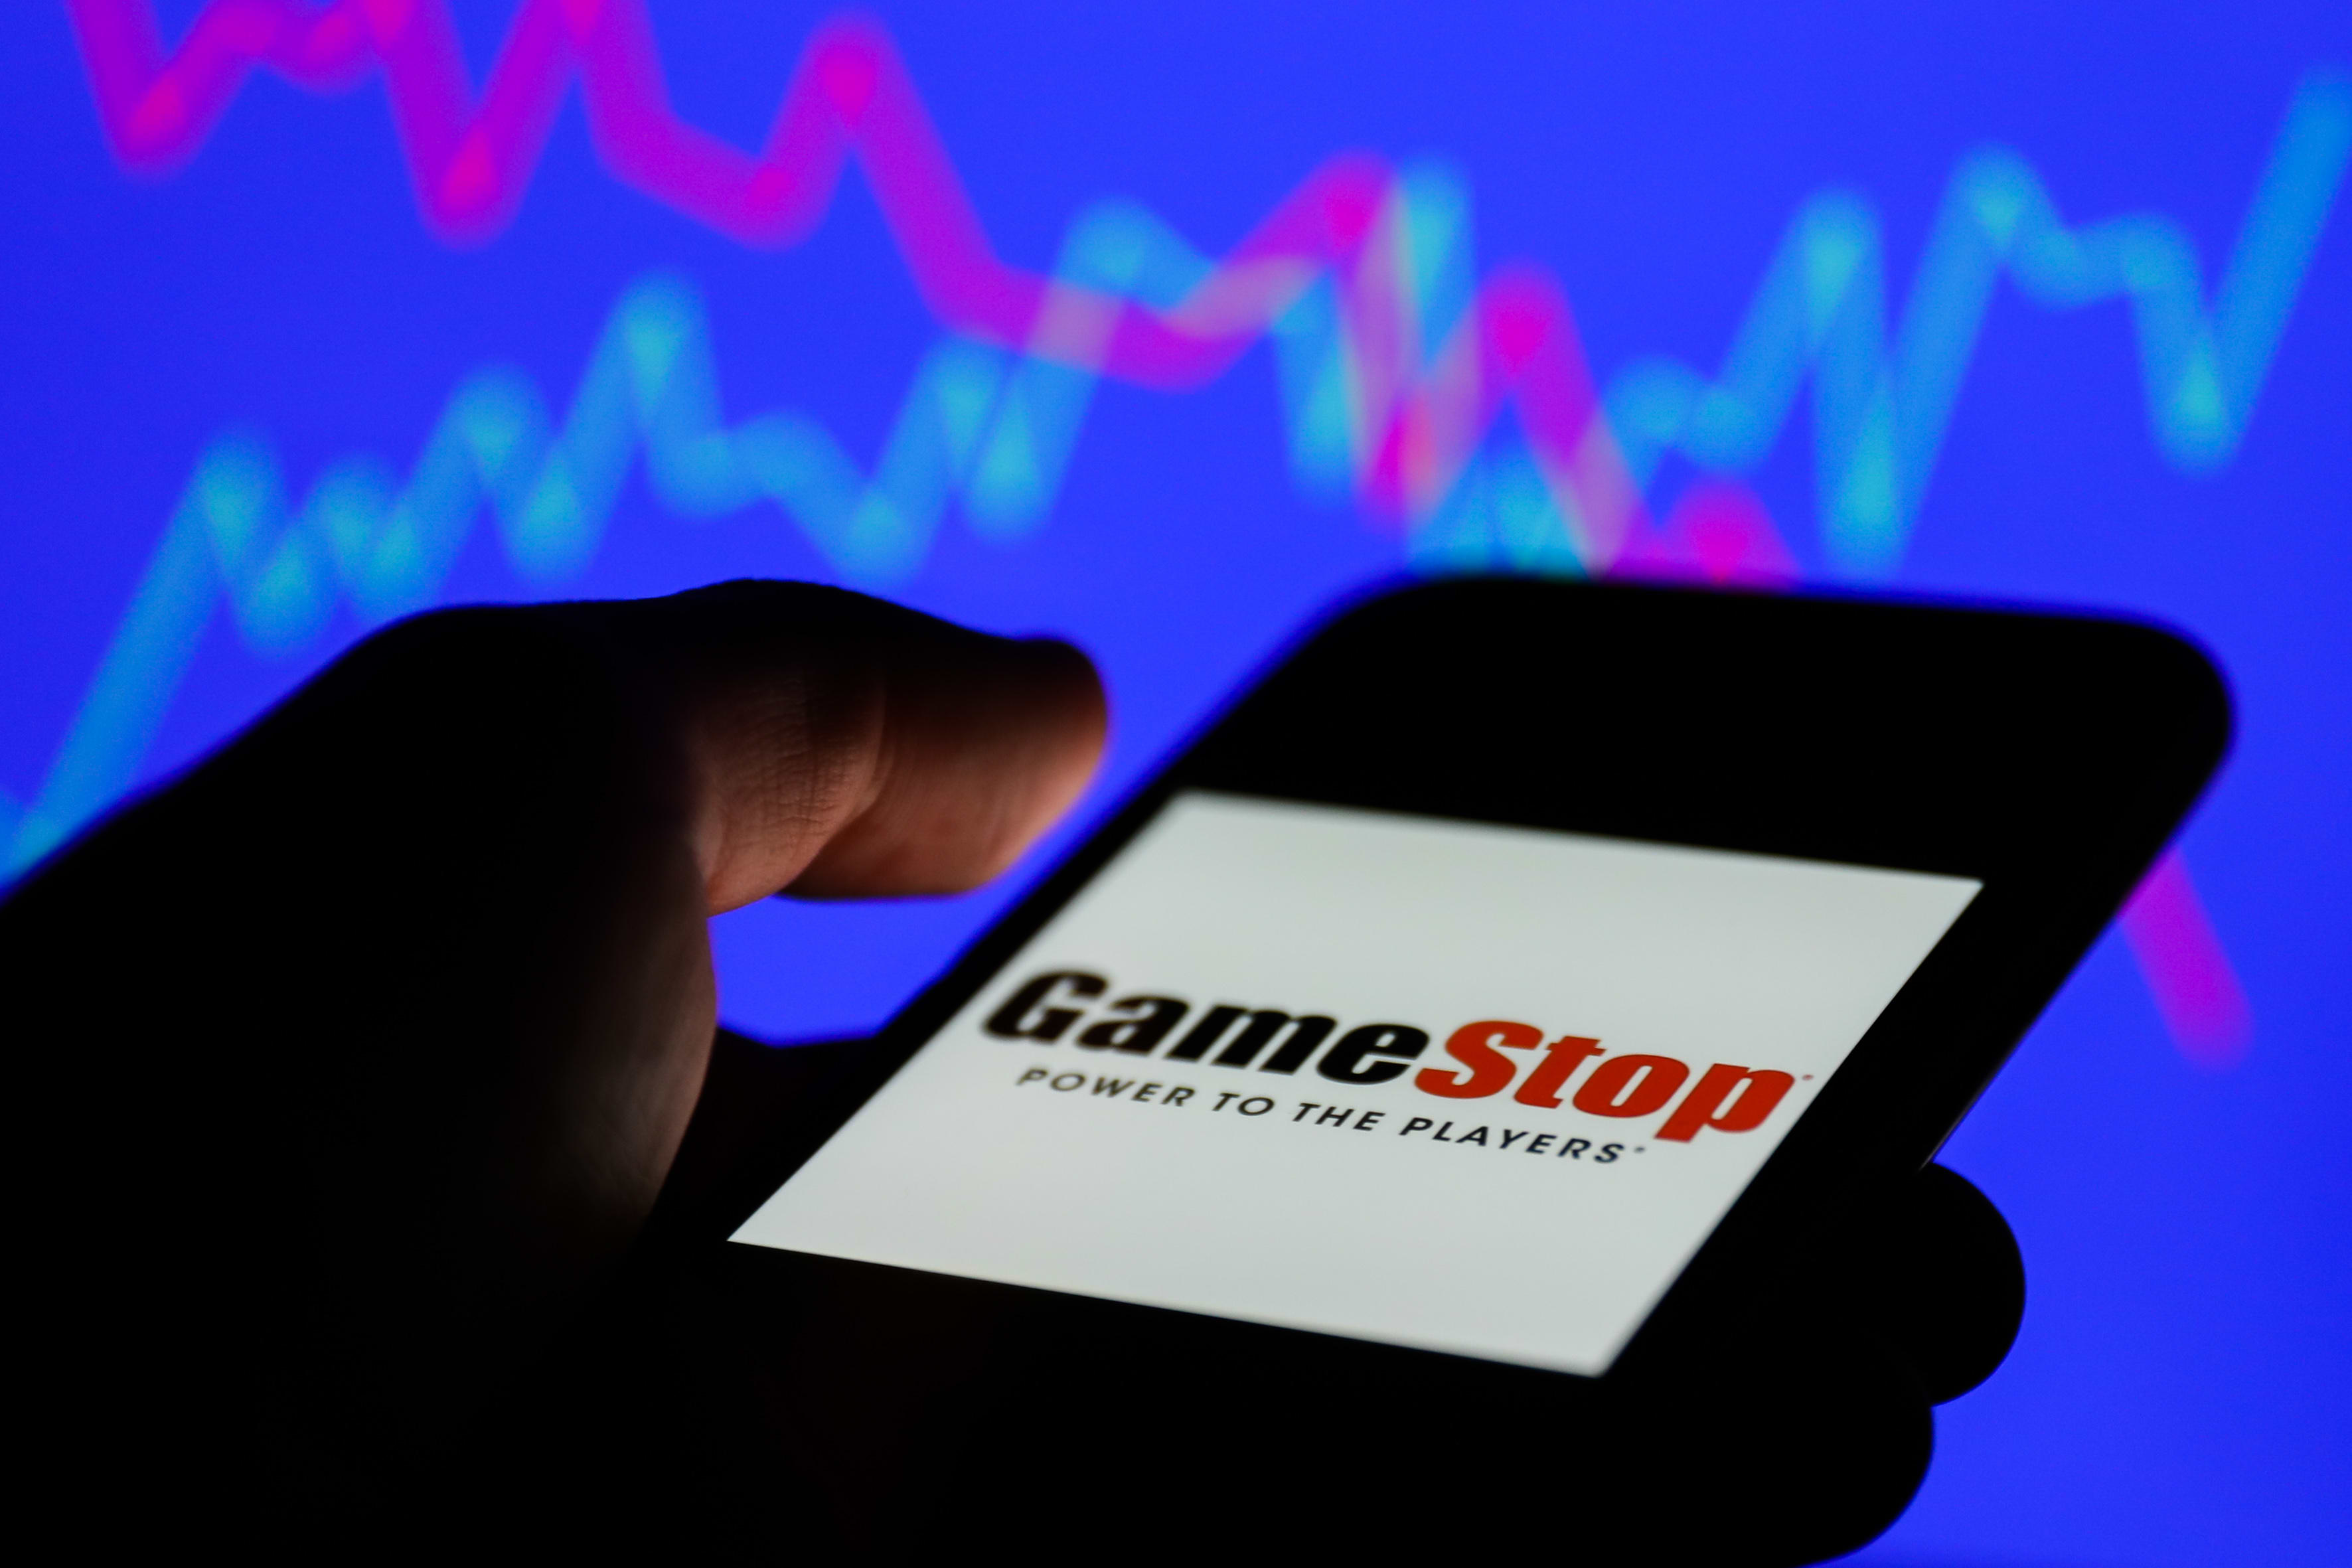 GameStop shares are rising in the premarket while Reddit favorites are rising again